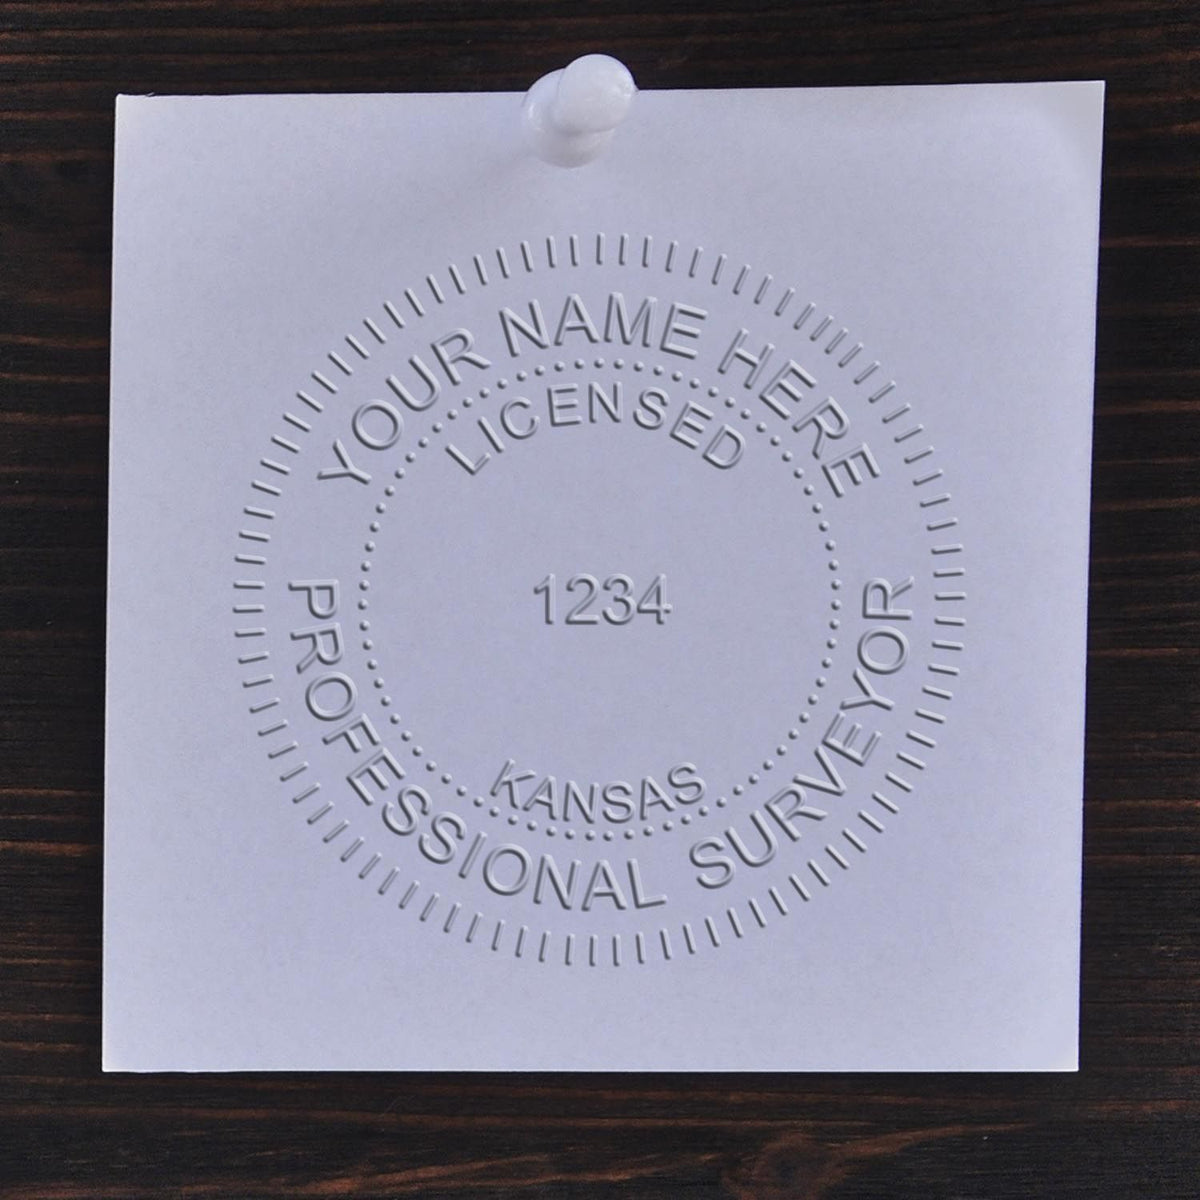 A lifestyle photo showing a stamped image of the Handheld Kansas Land Surveyor Seal on a piece of paper